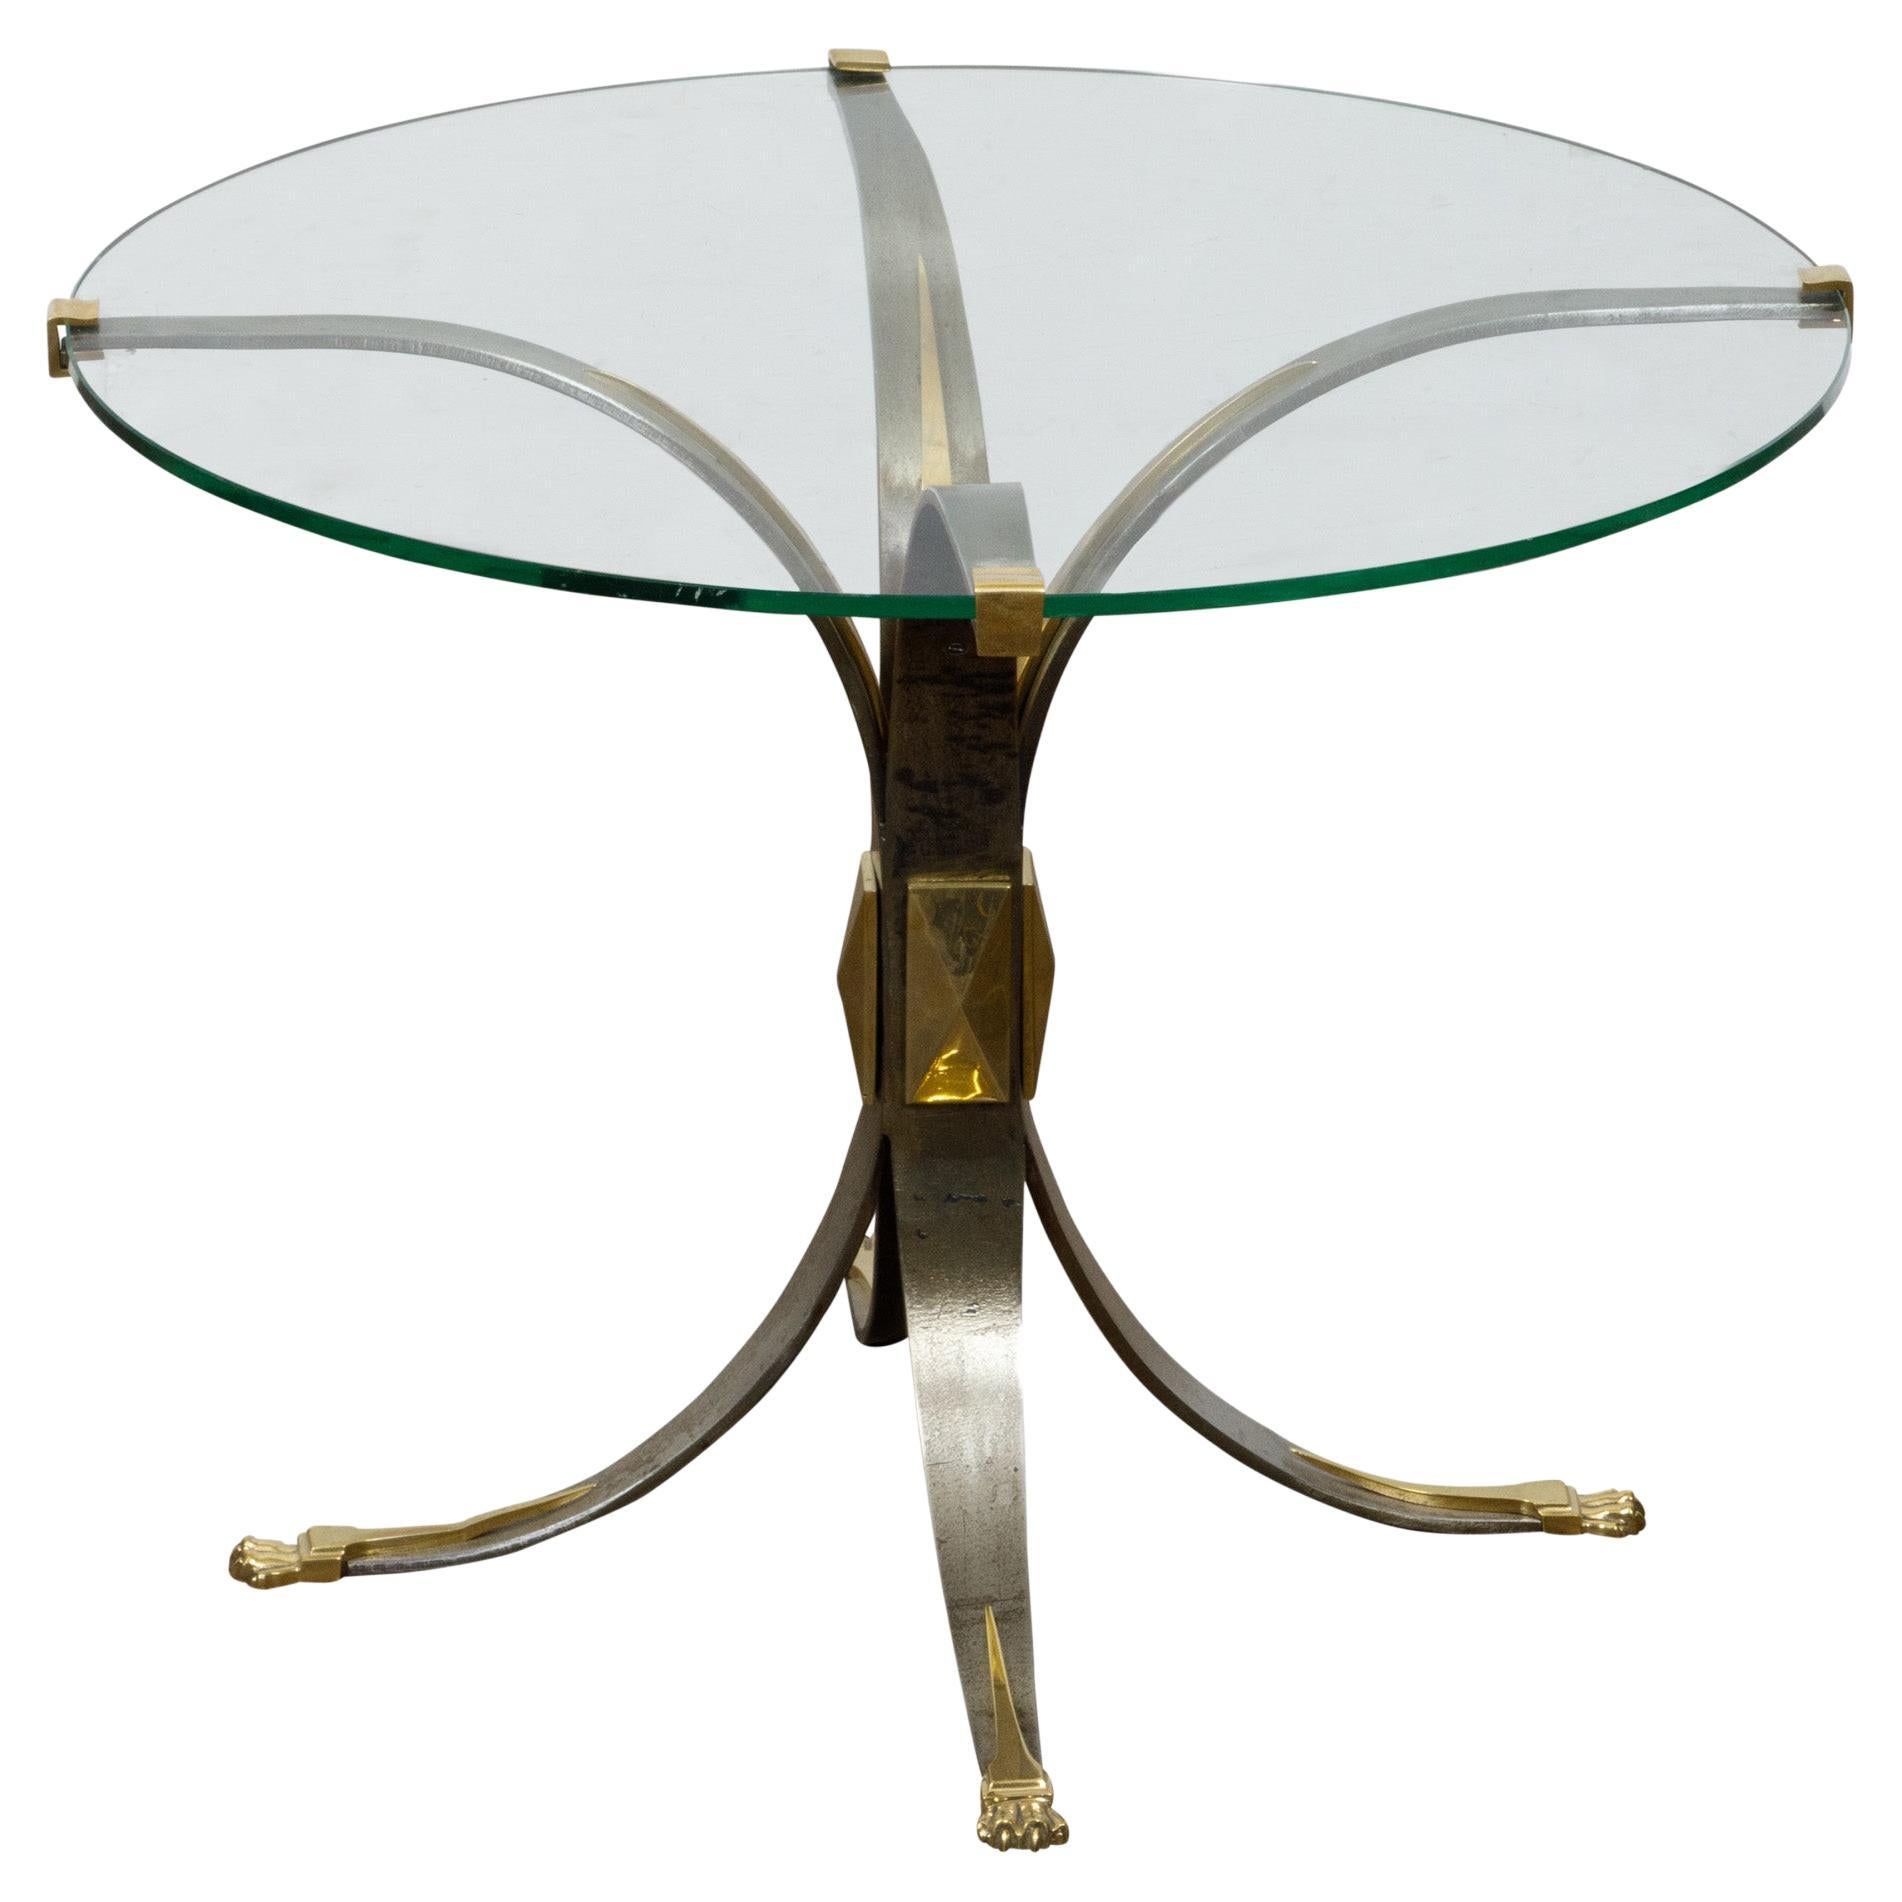 French Art Deco 1930s Steel and Brass Drinks Table with Glass Top, Splaying Legs For Sale